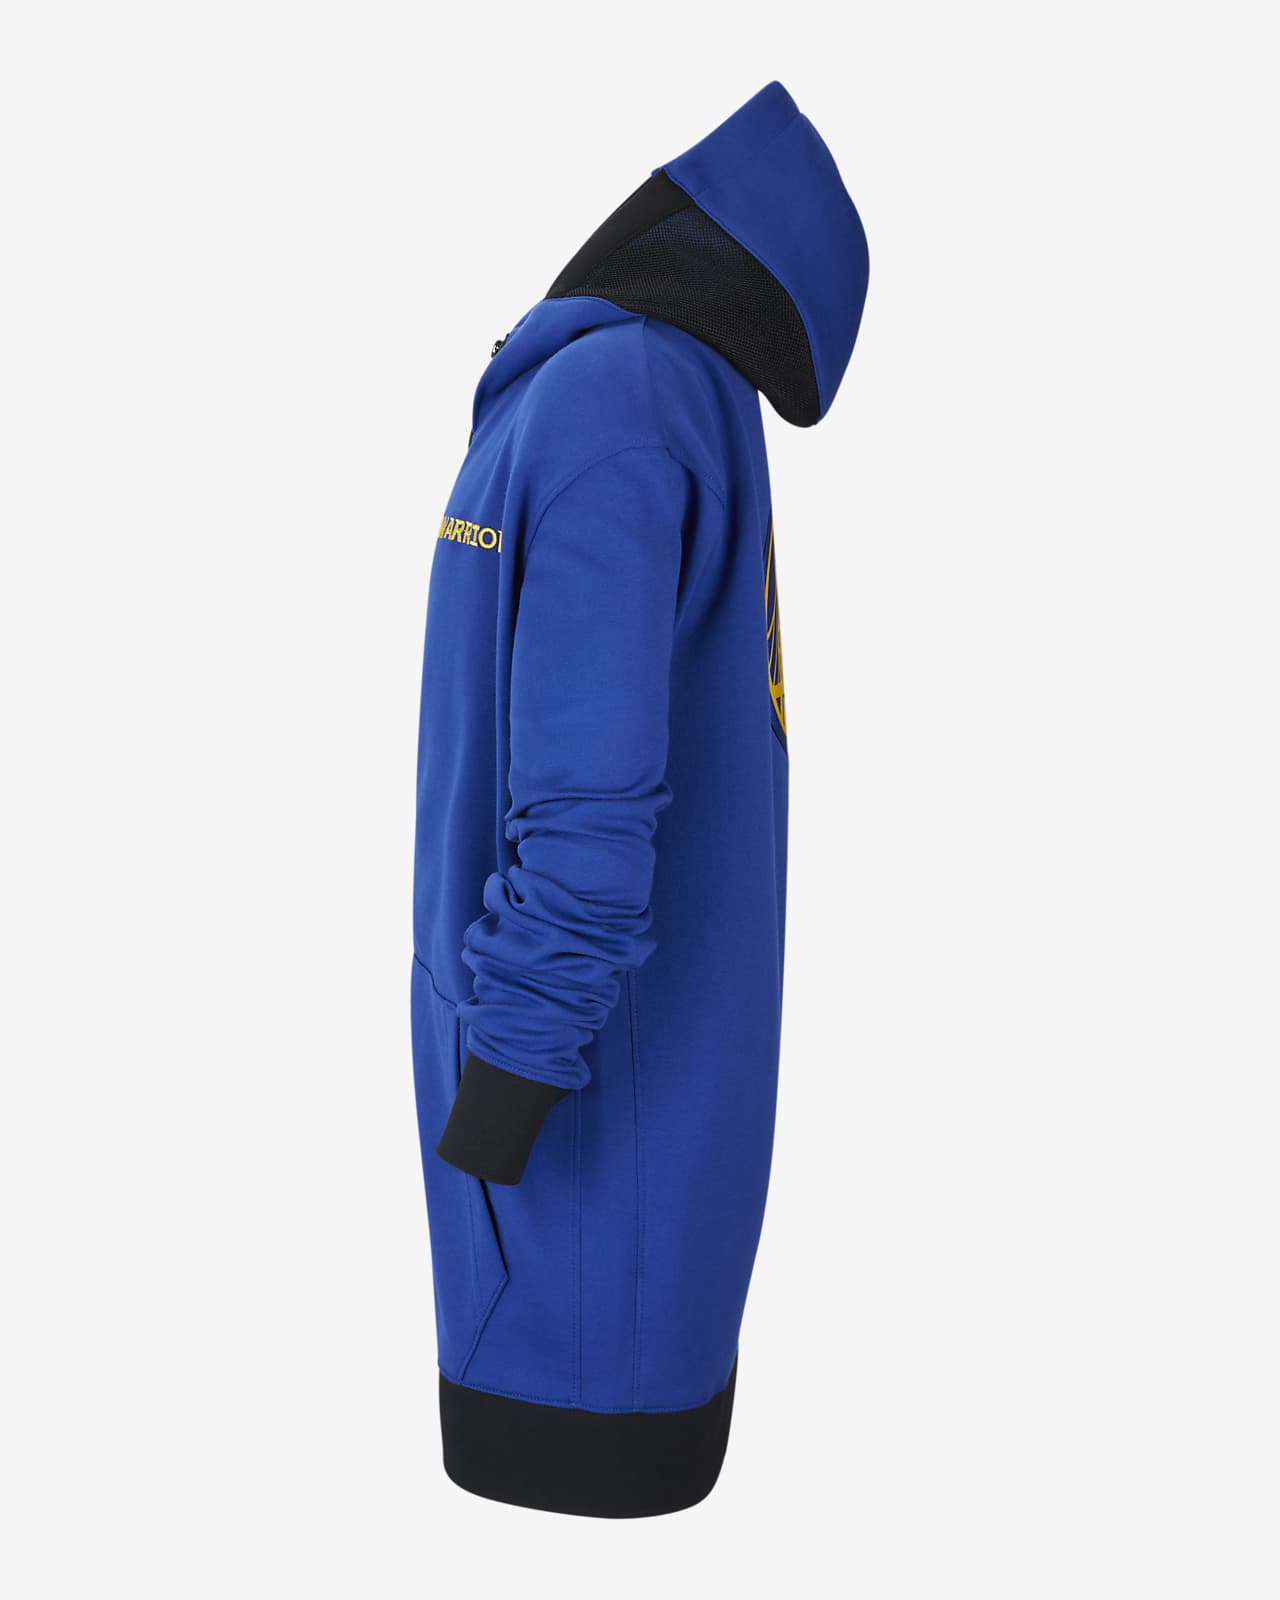 nike youth golden state warriors hoodie